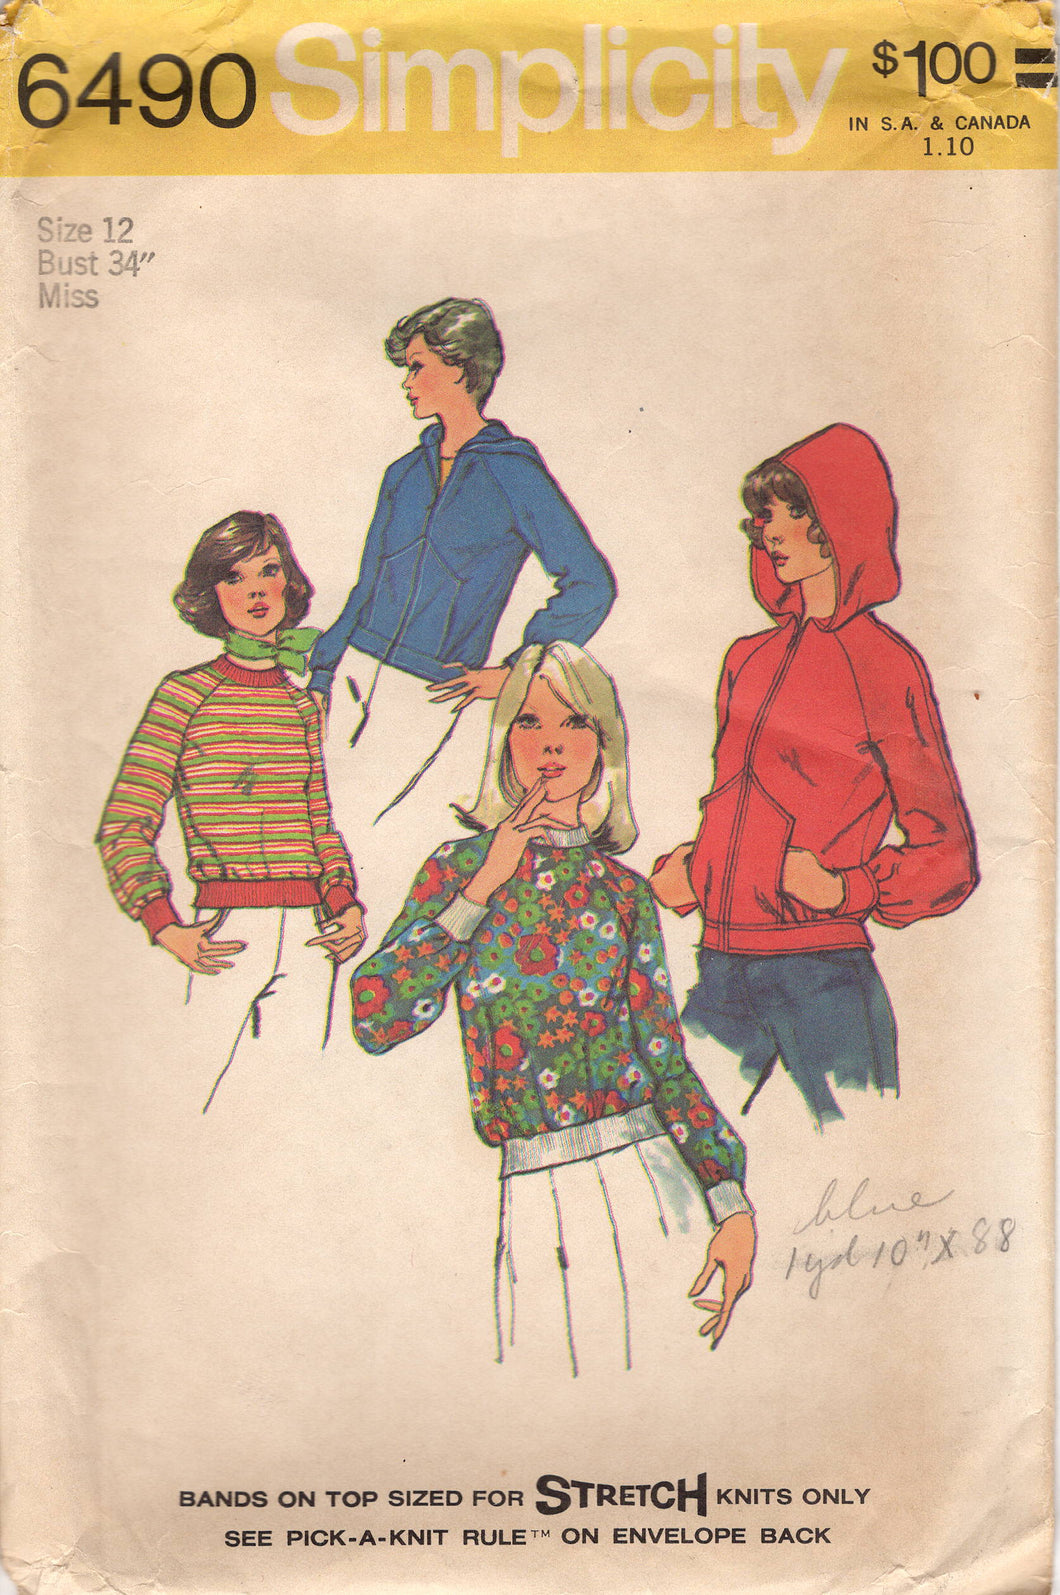 1970's Simplicity Unlined Jacket with Hood or Sweatshirt Pattern - Bust 34